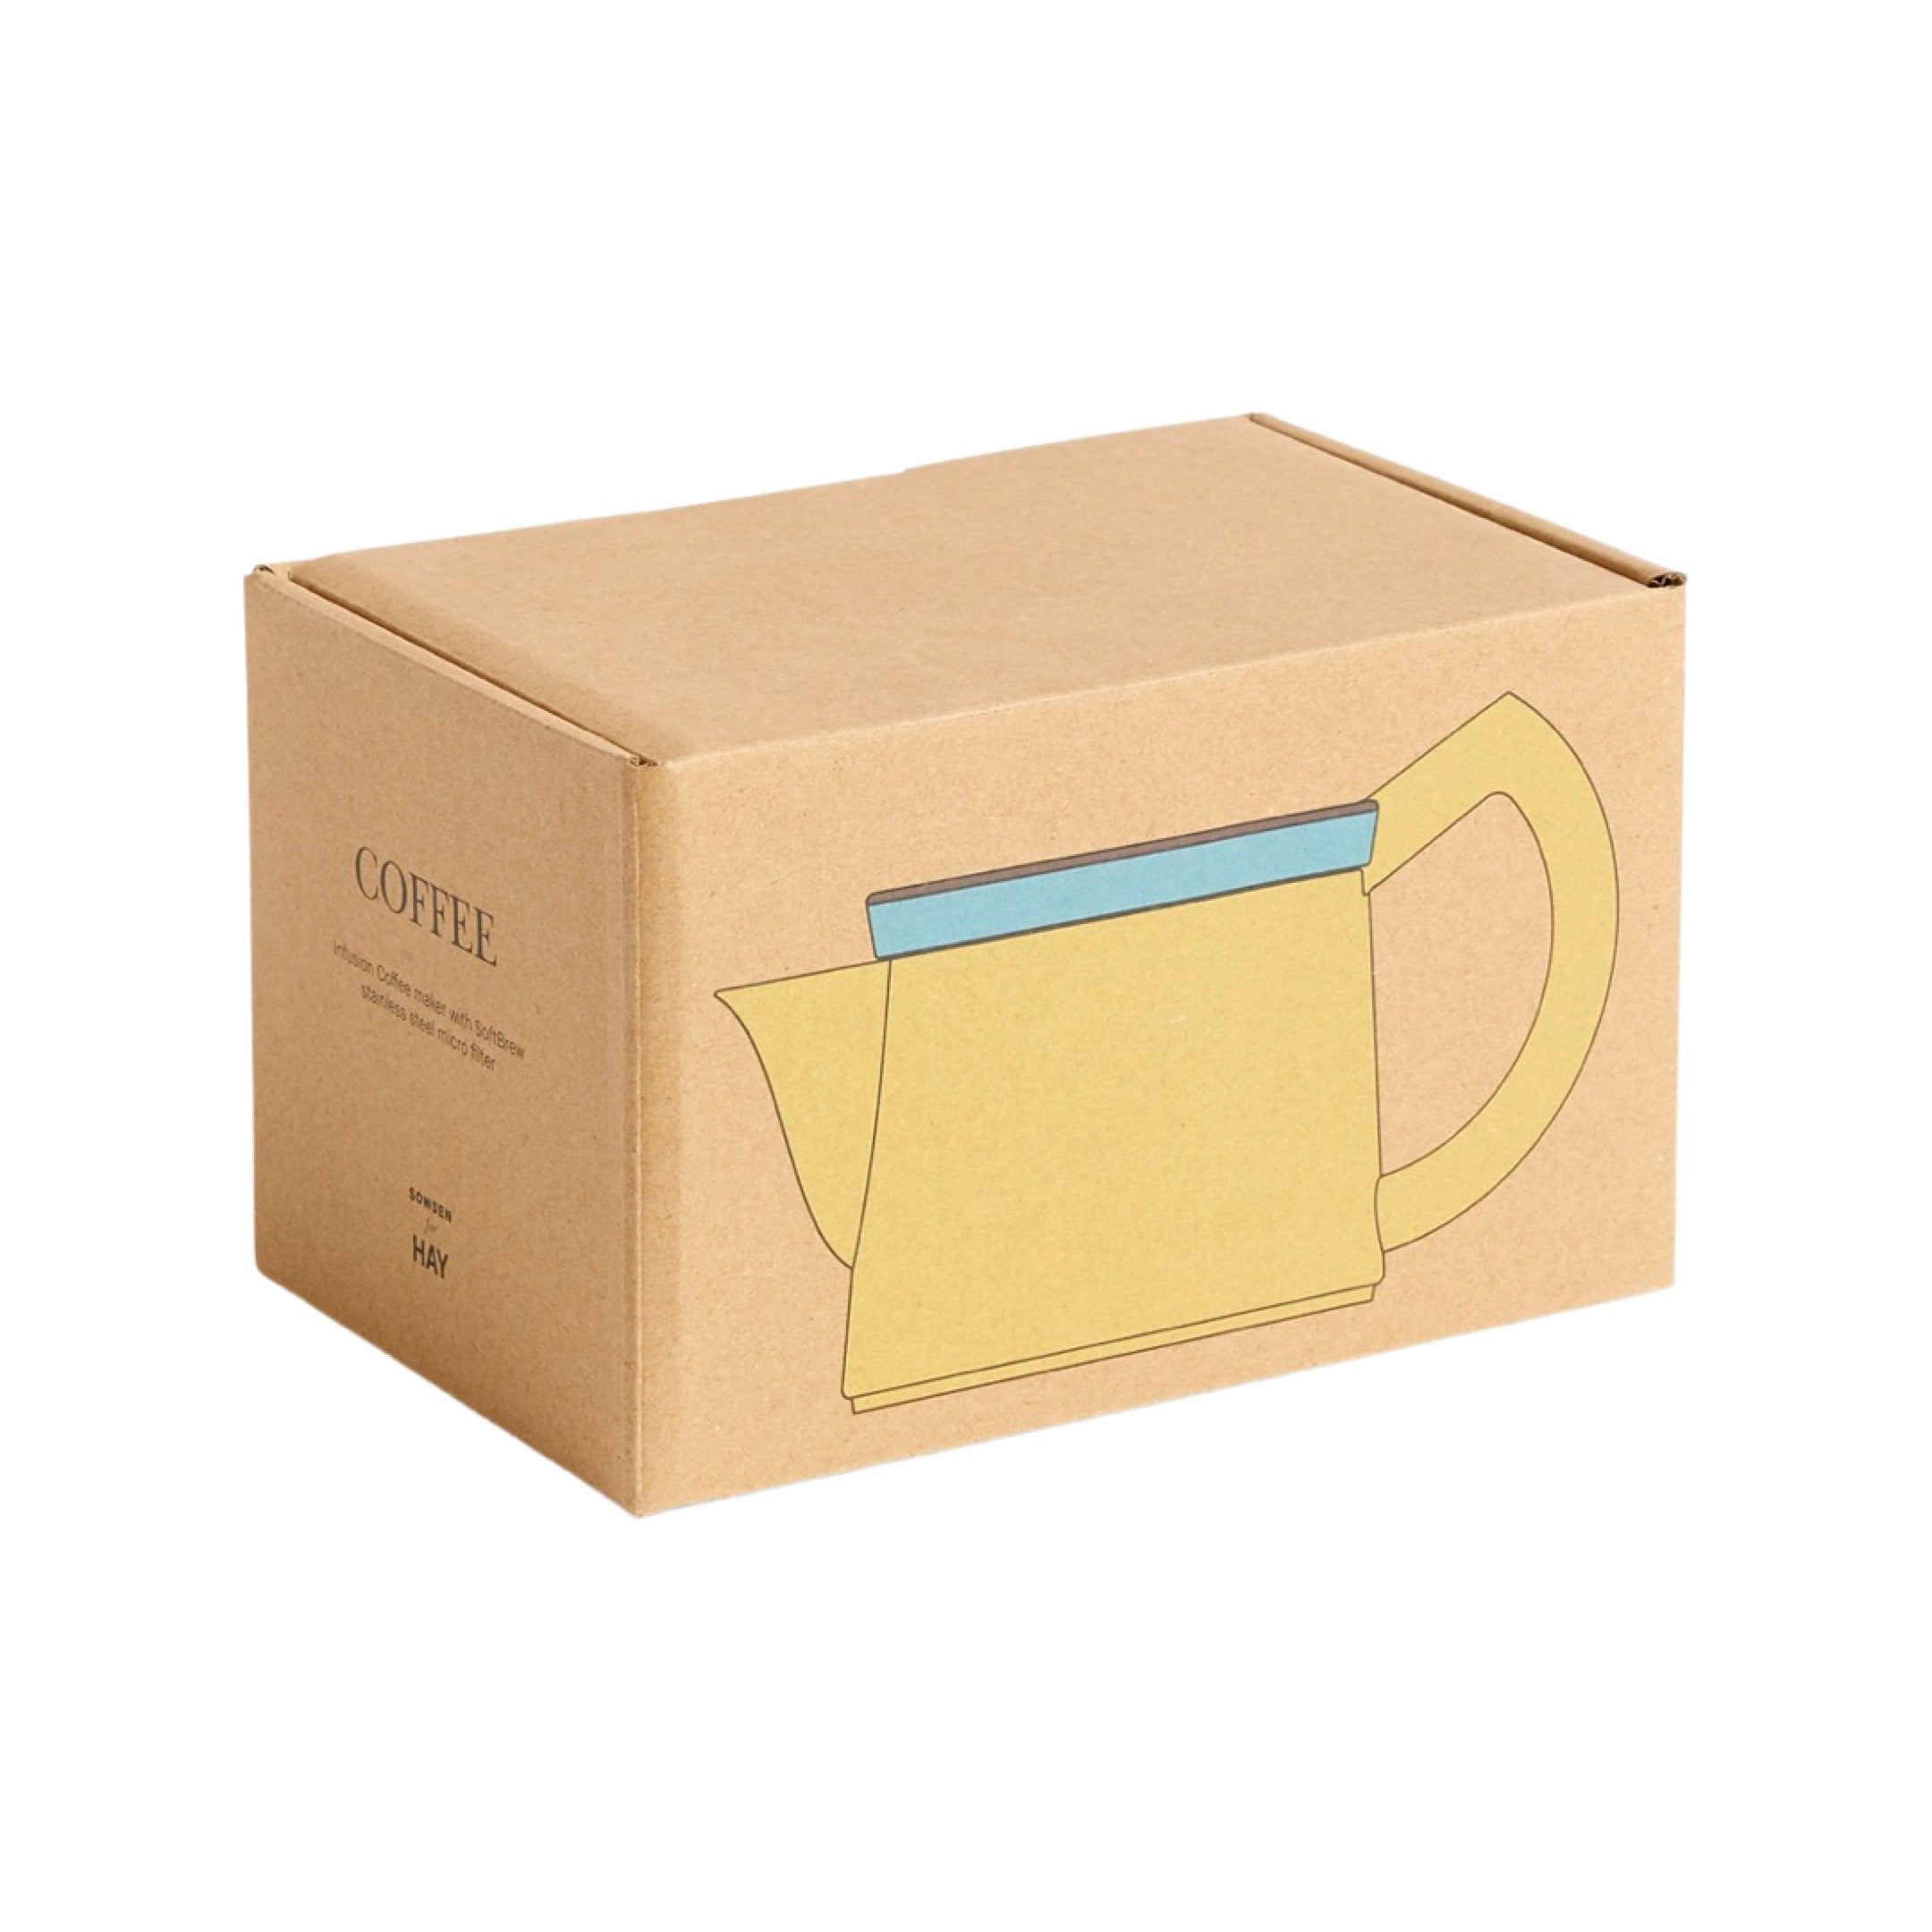 HAY Sowden Coffee Brewer / Pot - Small - Light Yellow